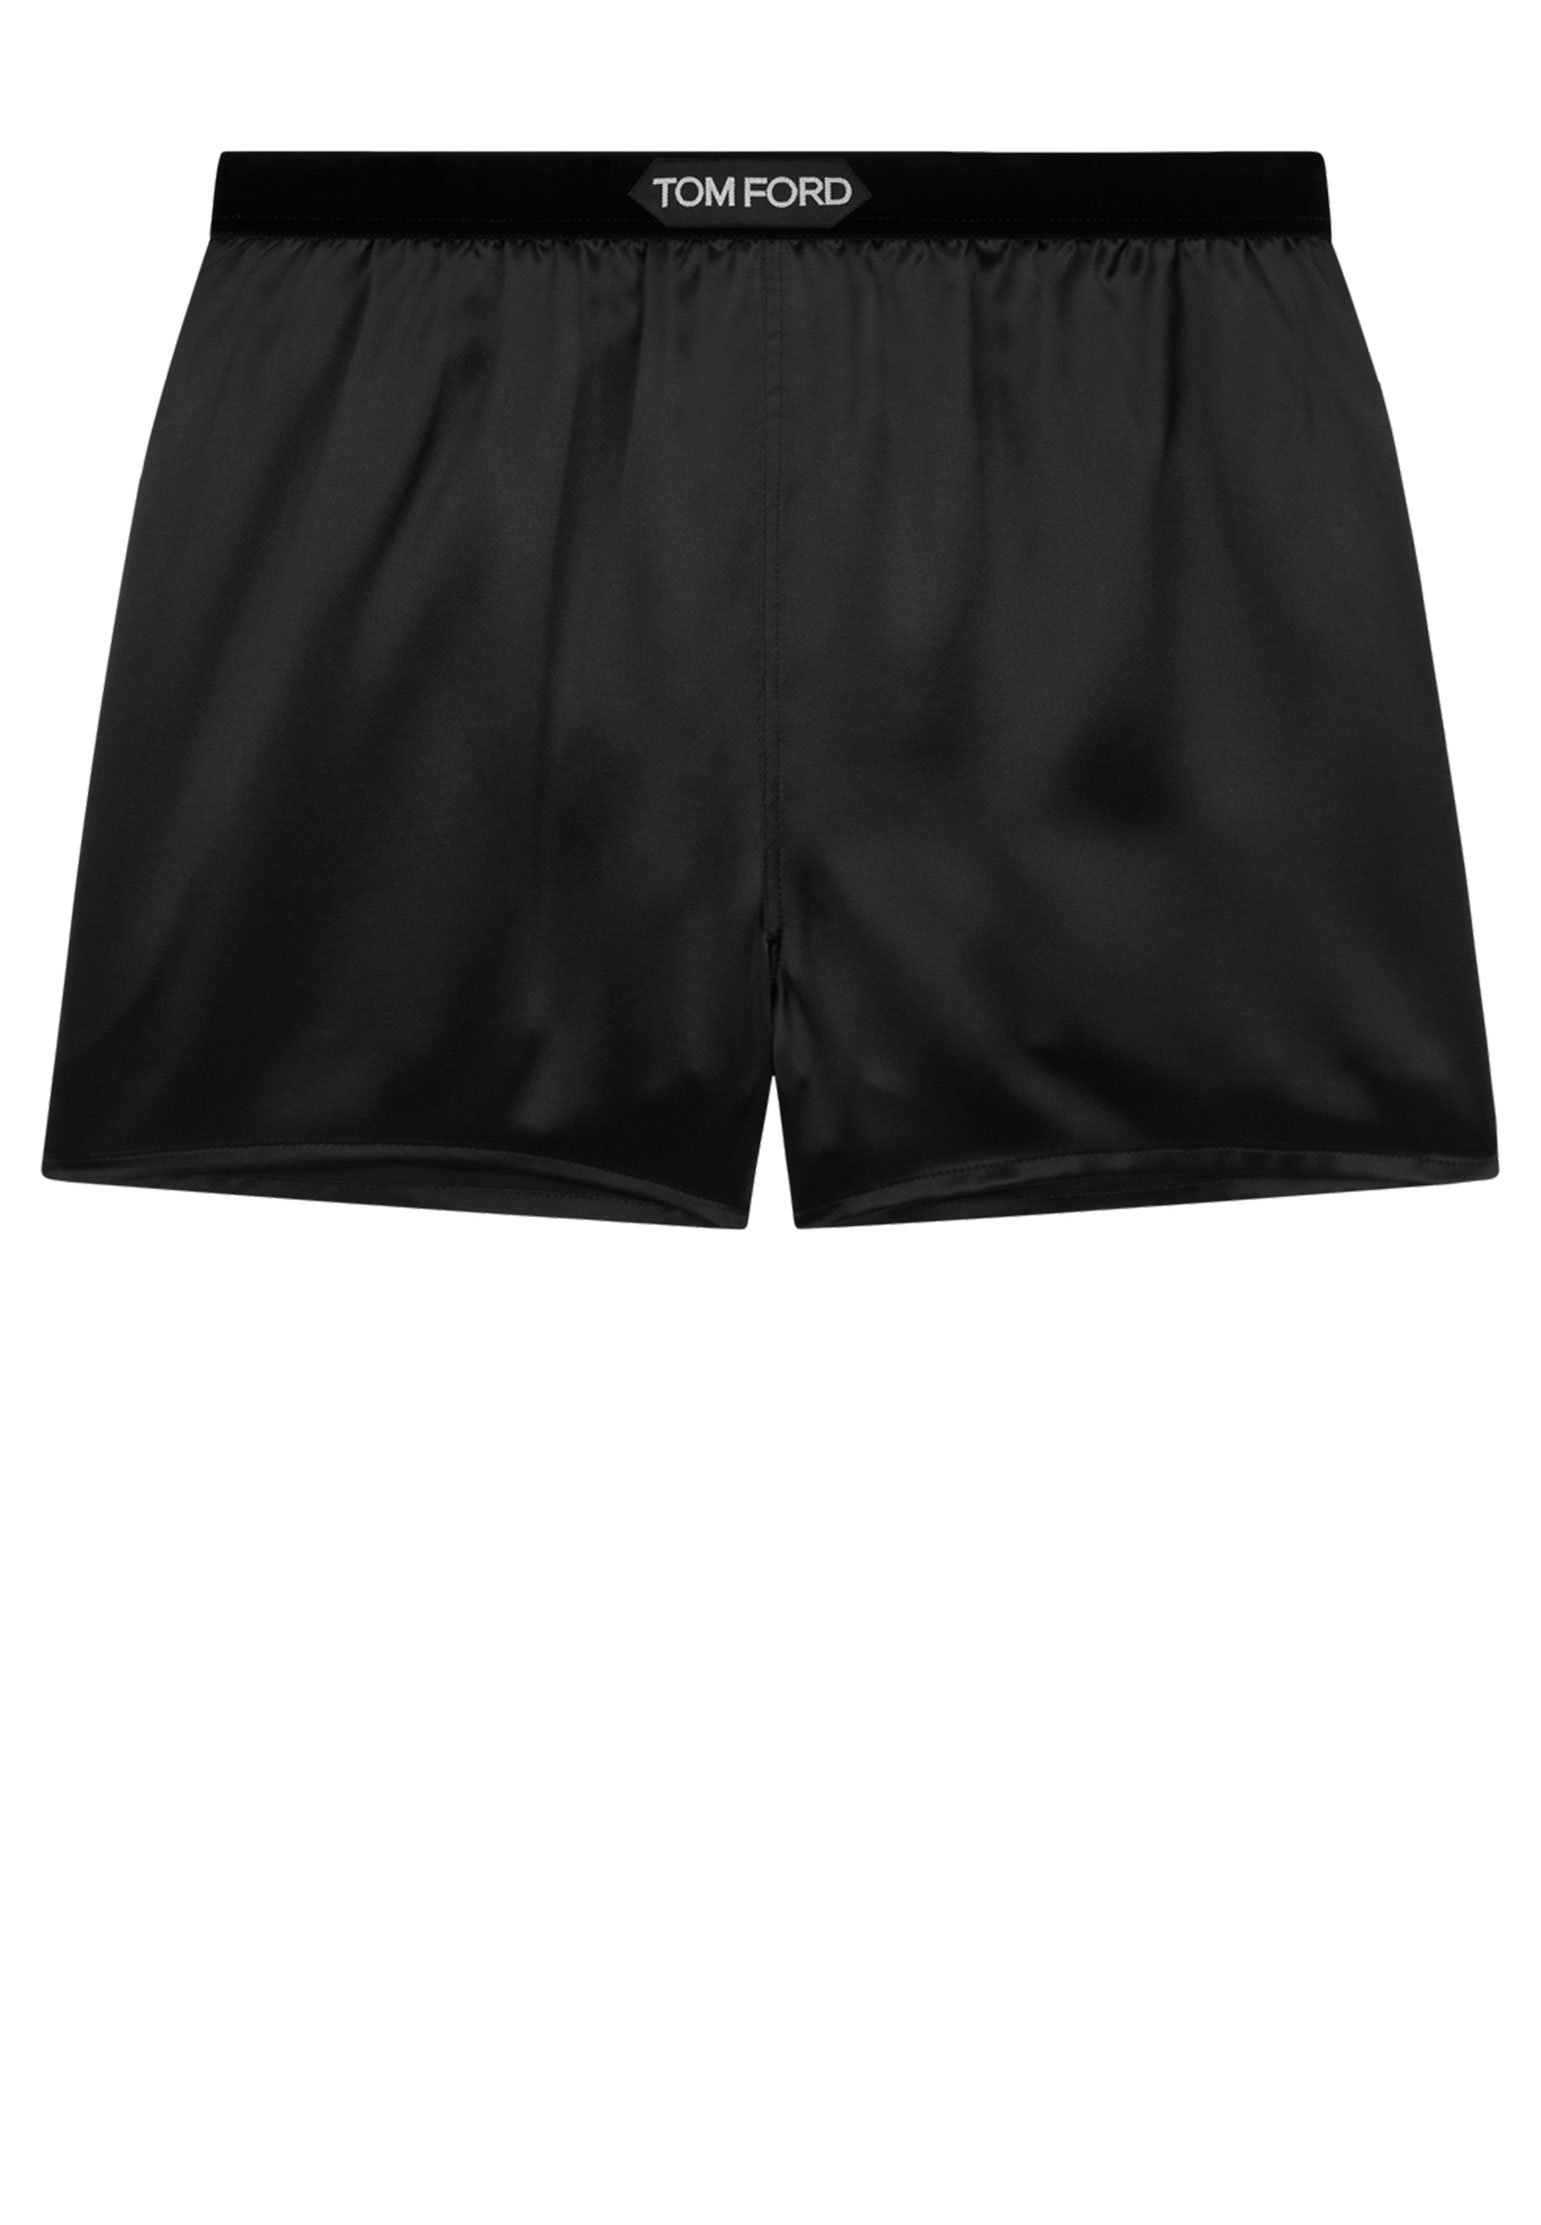 Shorts TOM FORD Color: black (Code: 2946) in online store Allure